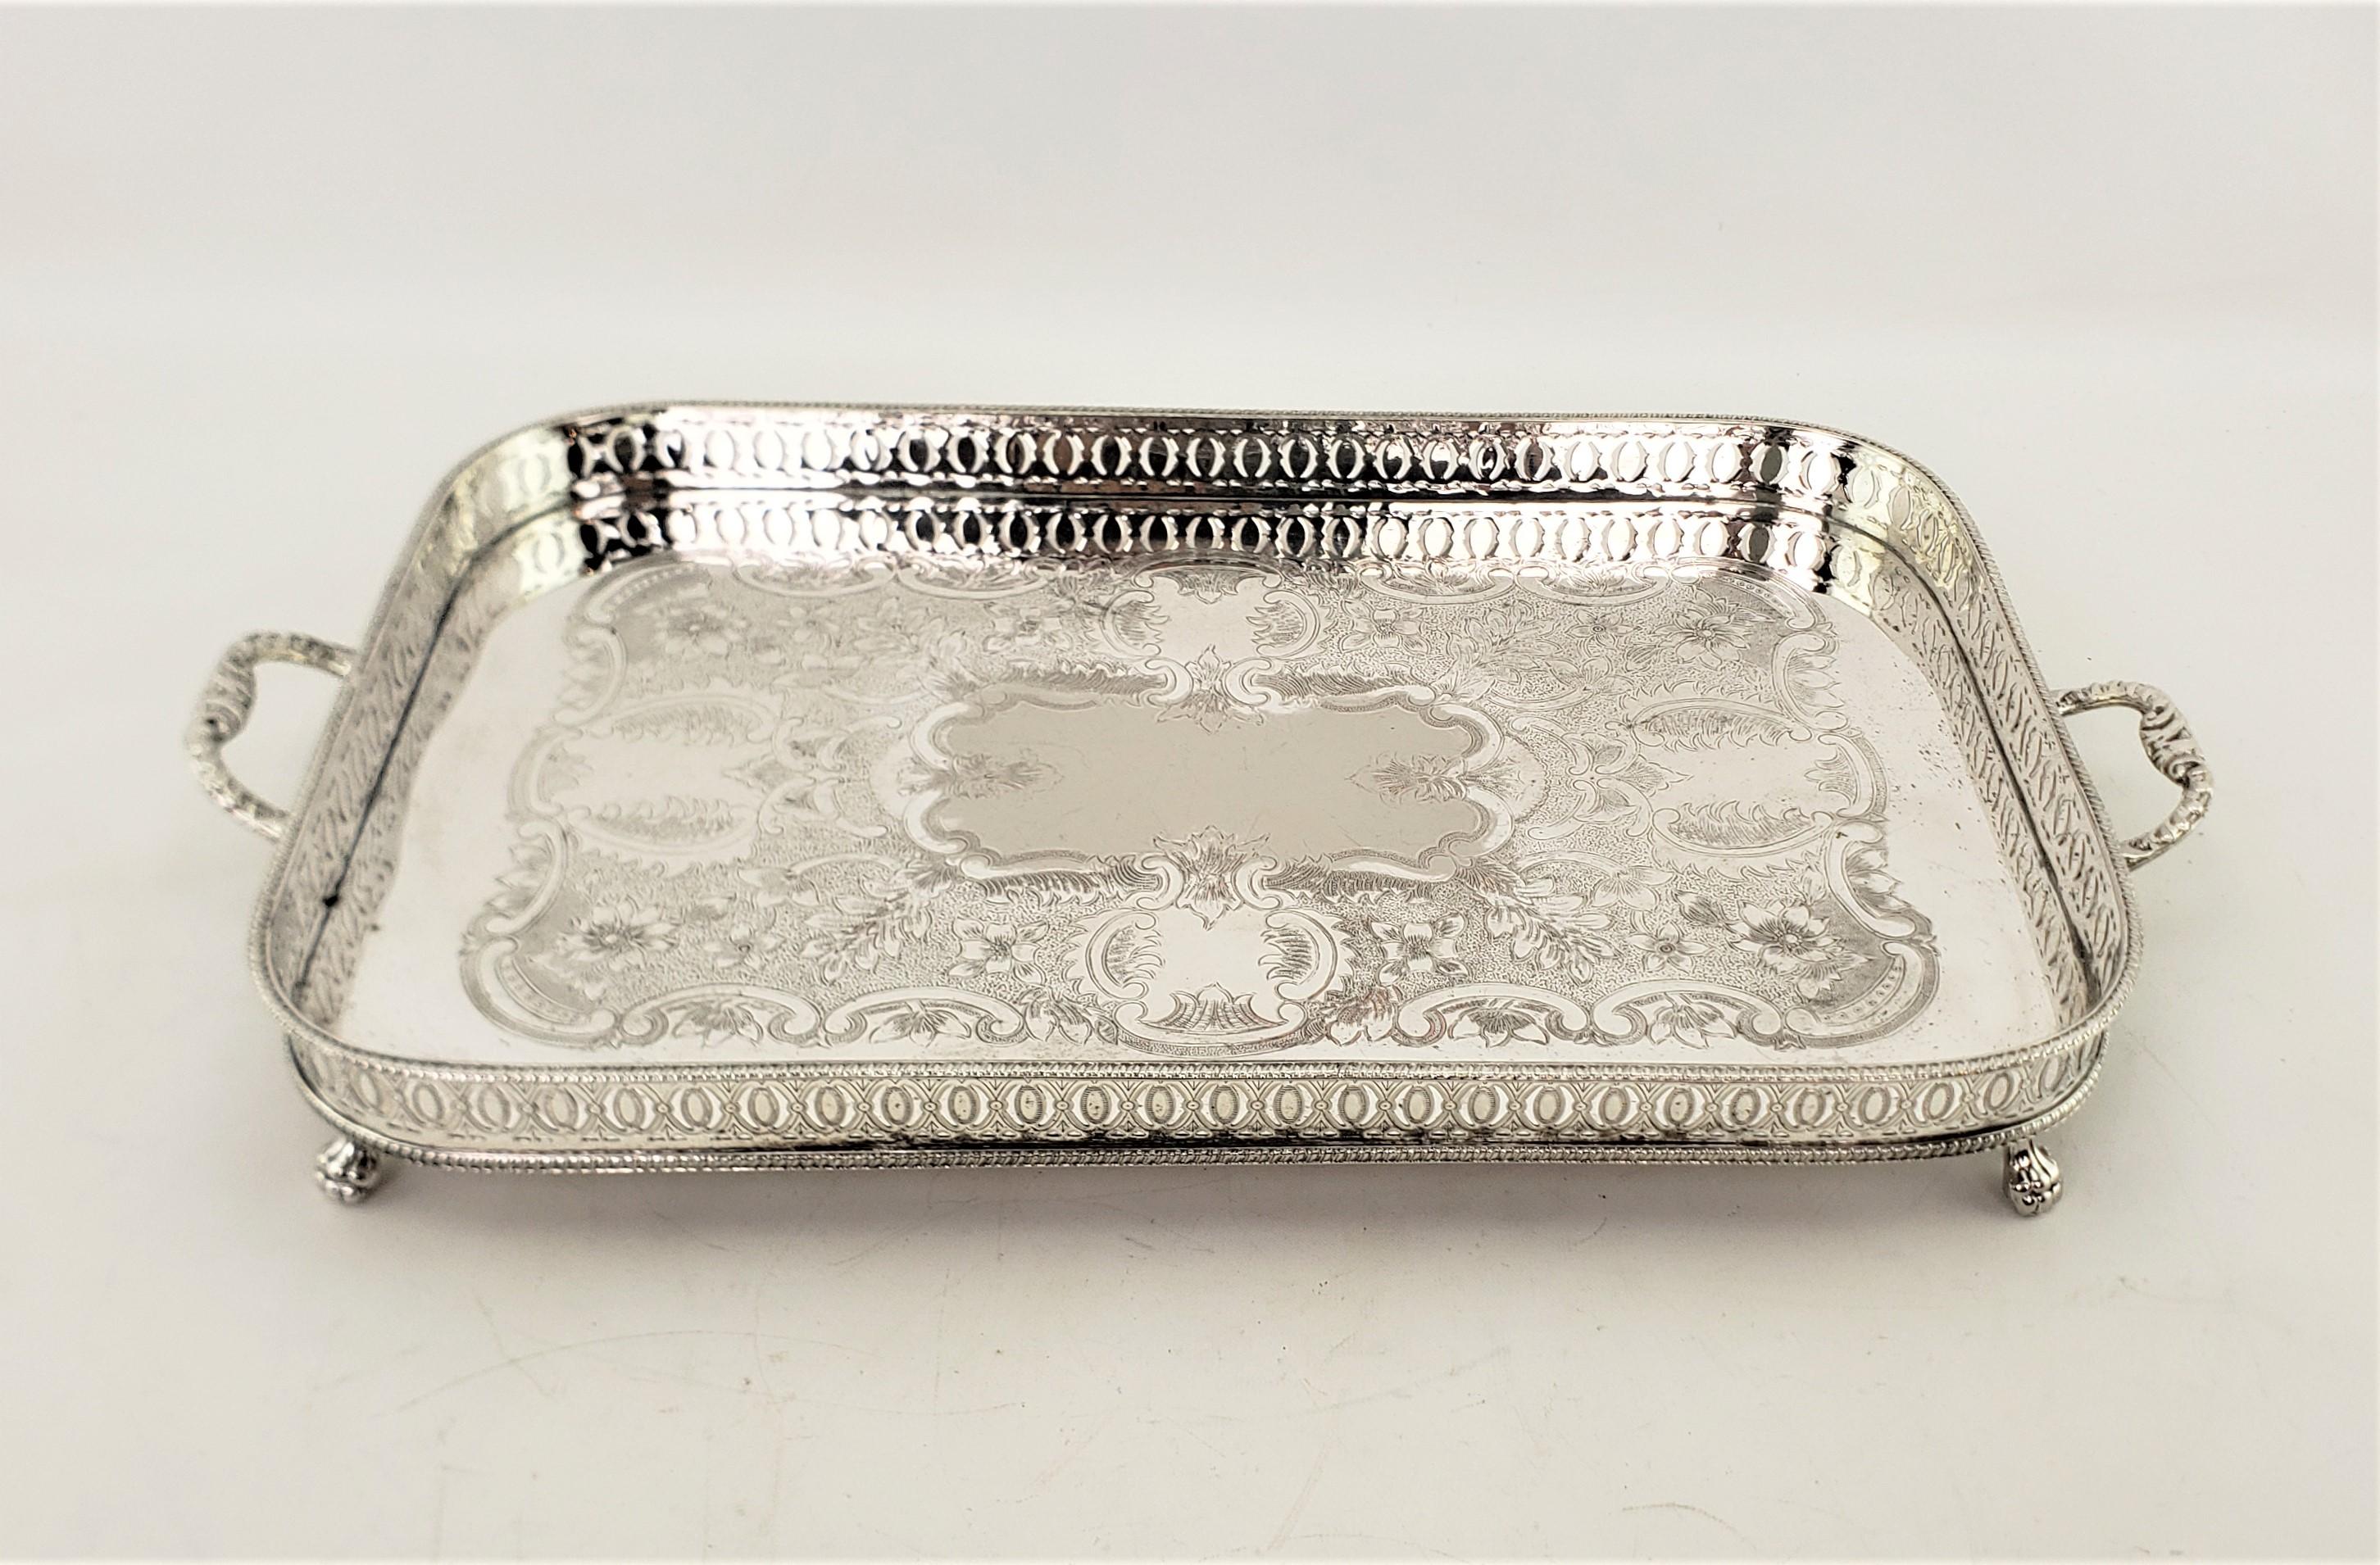 Art Deco Antique English Silver Plated Footed Gallery Serving Tray with Floral Engraving